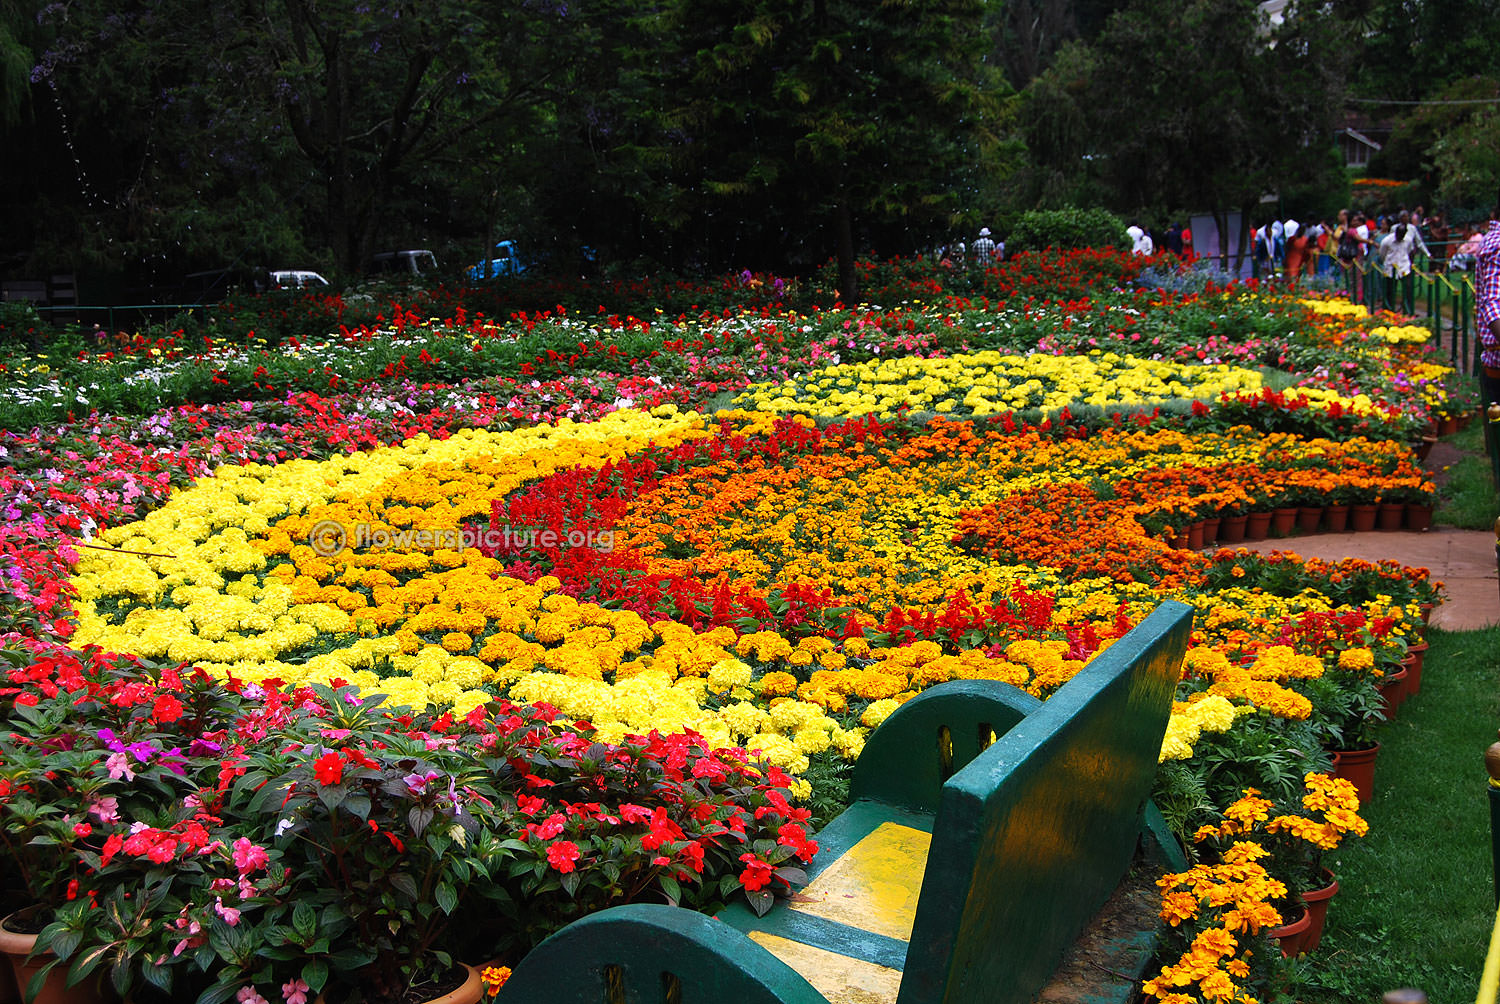 Ooty Flower Show 2015 Photos Gallery - Botanical Garden Ooty Flower Show , HD Wallpaper & Backgrounds